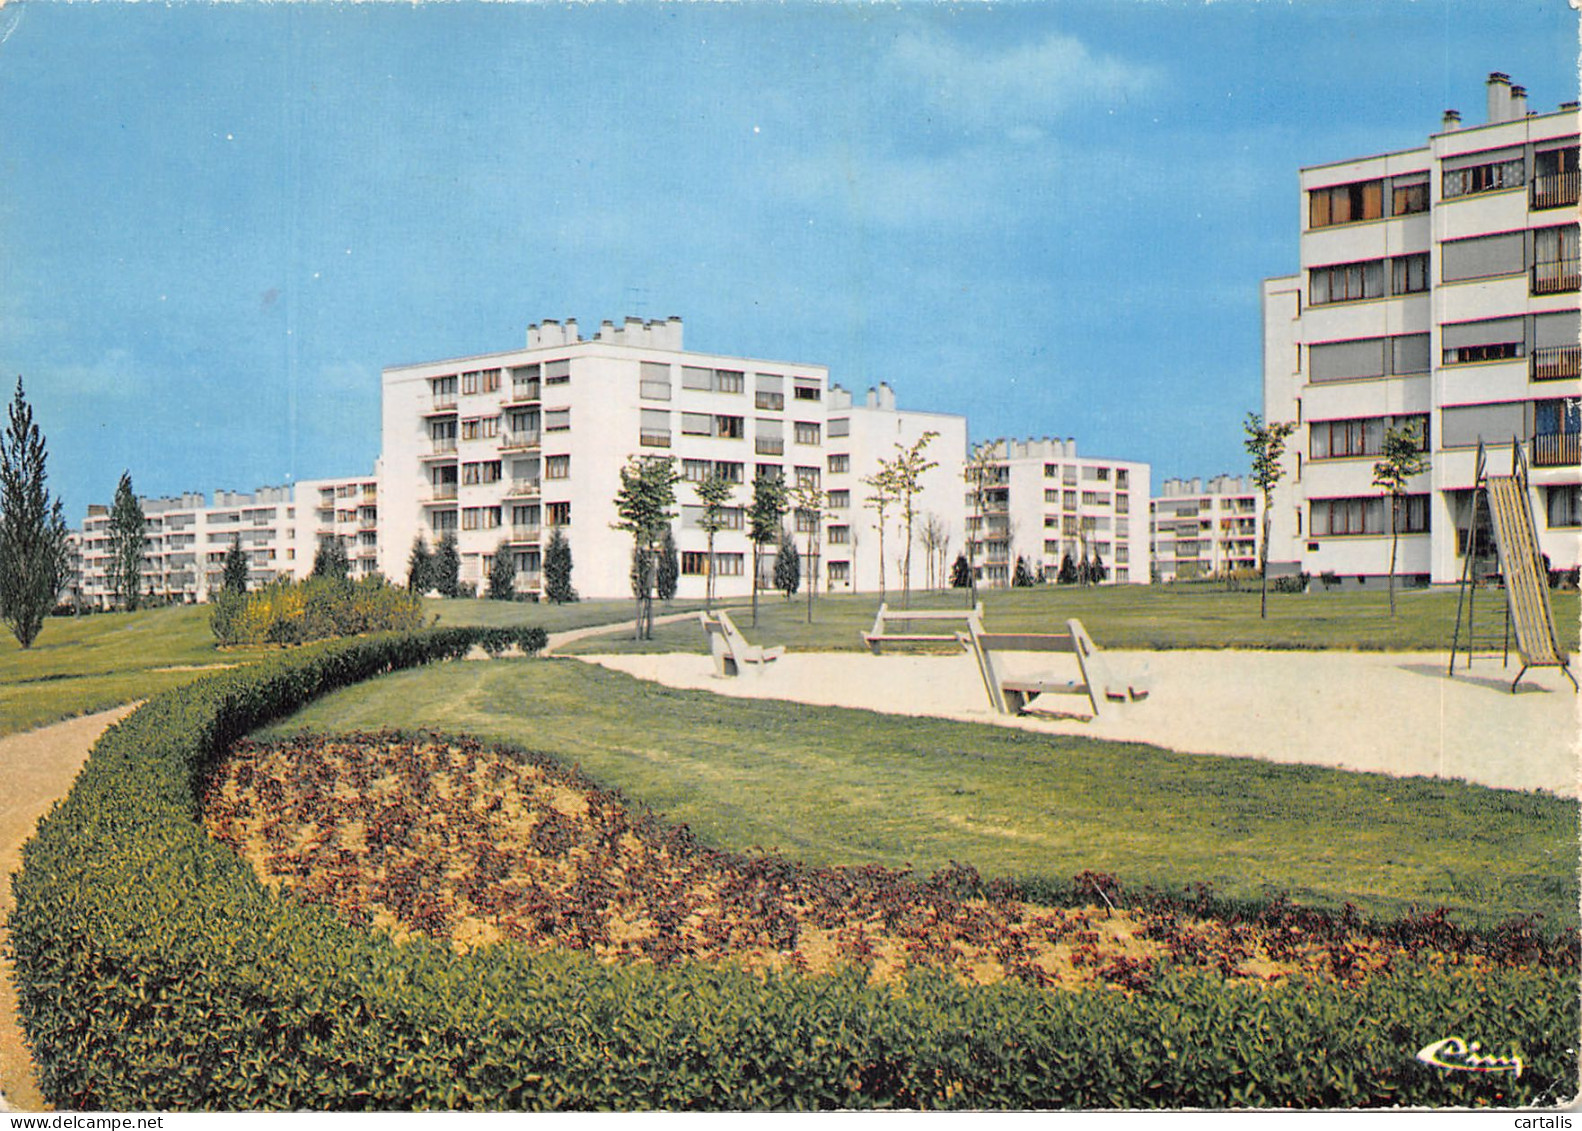 94-CHENNEVIERES-N 595-B/0127 - Chennevieres Sur Marne